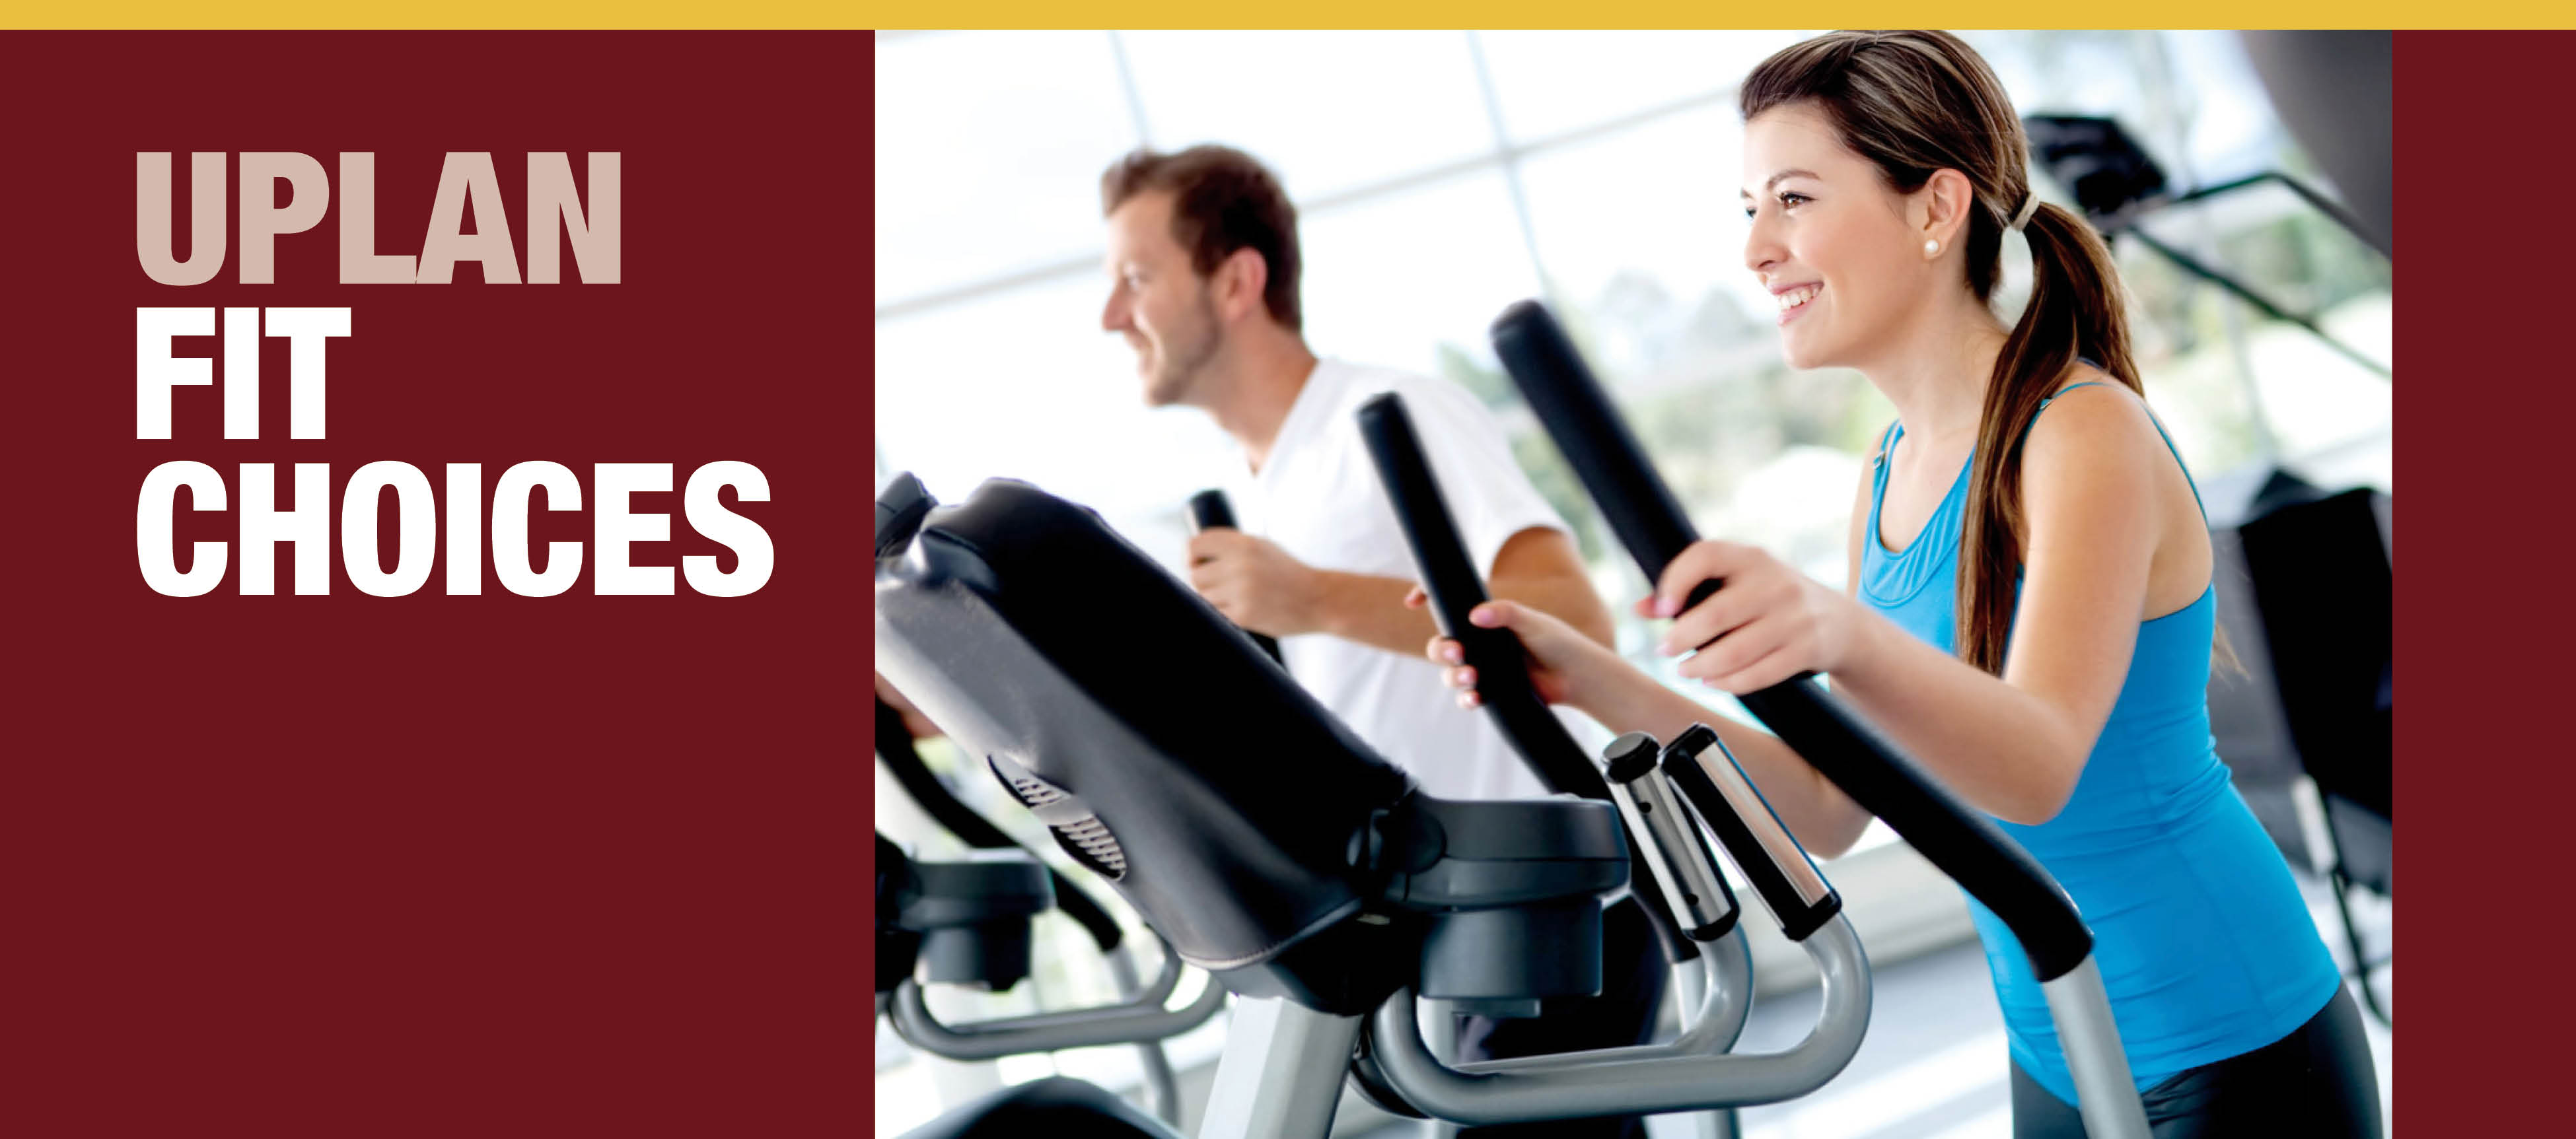 UPLAN FIT CHOICES people on cardio machines